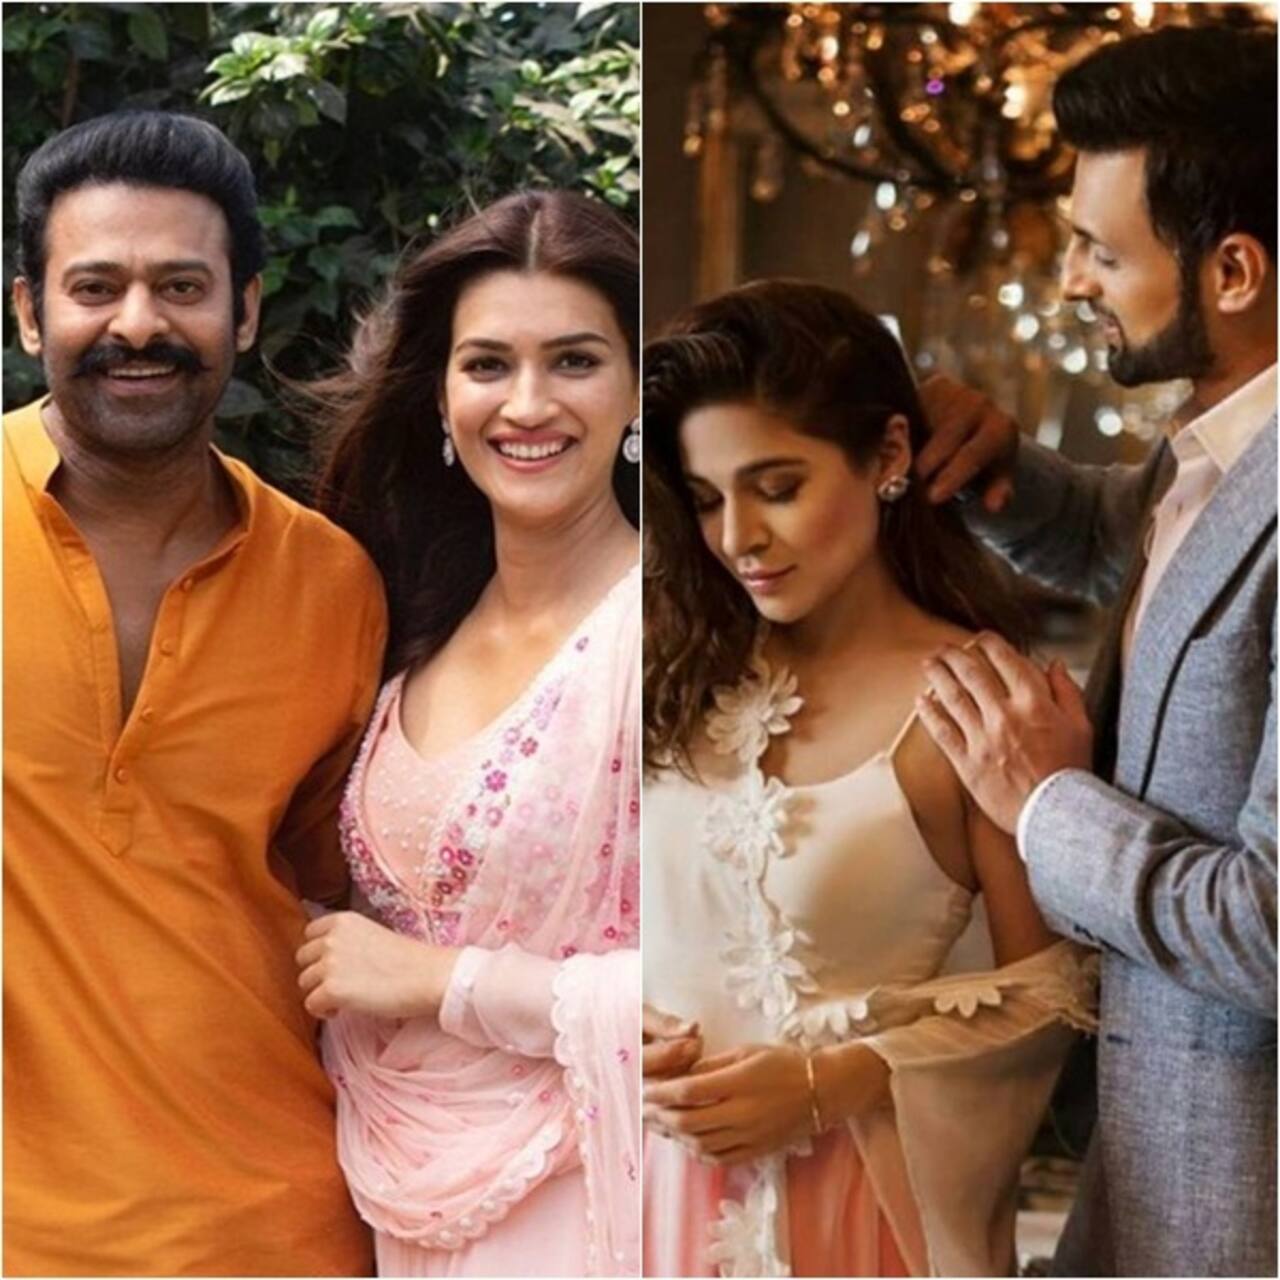 Entertainment news today: Kriti Sanon refutes dating rumours with Prabhas; Ayesha Omar's reply on marriage plans with Shoaib Malik amid divorce with Sania Mirza and more